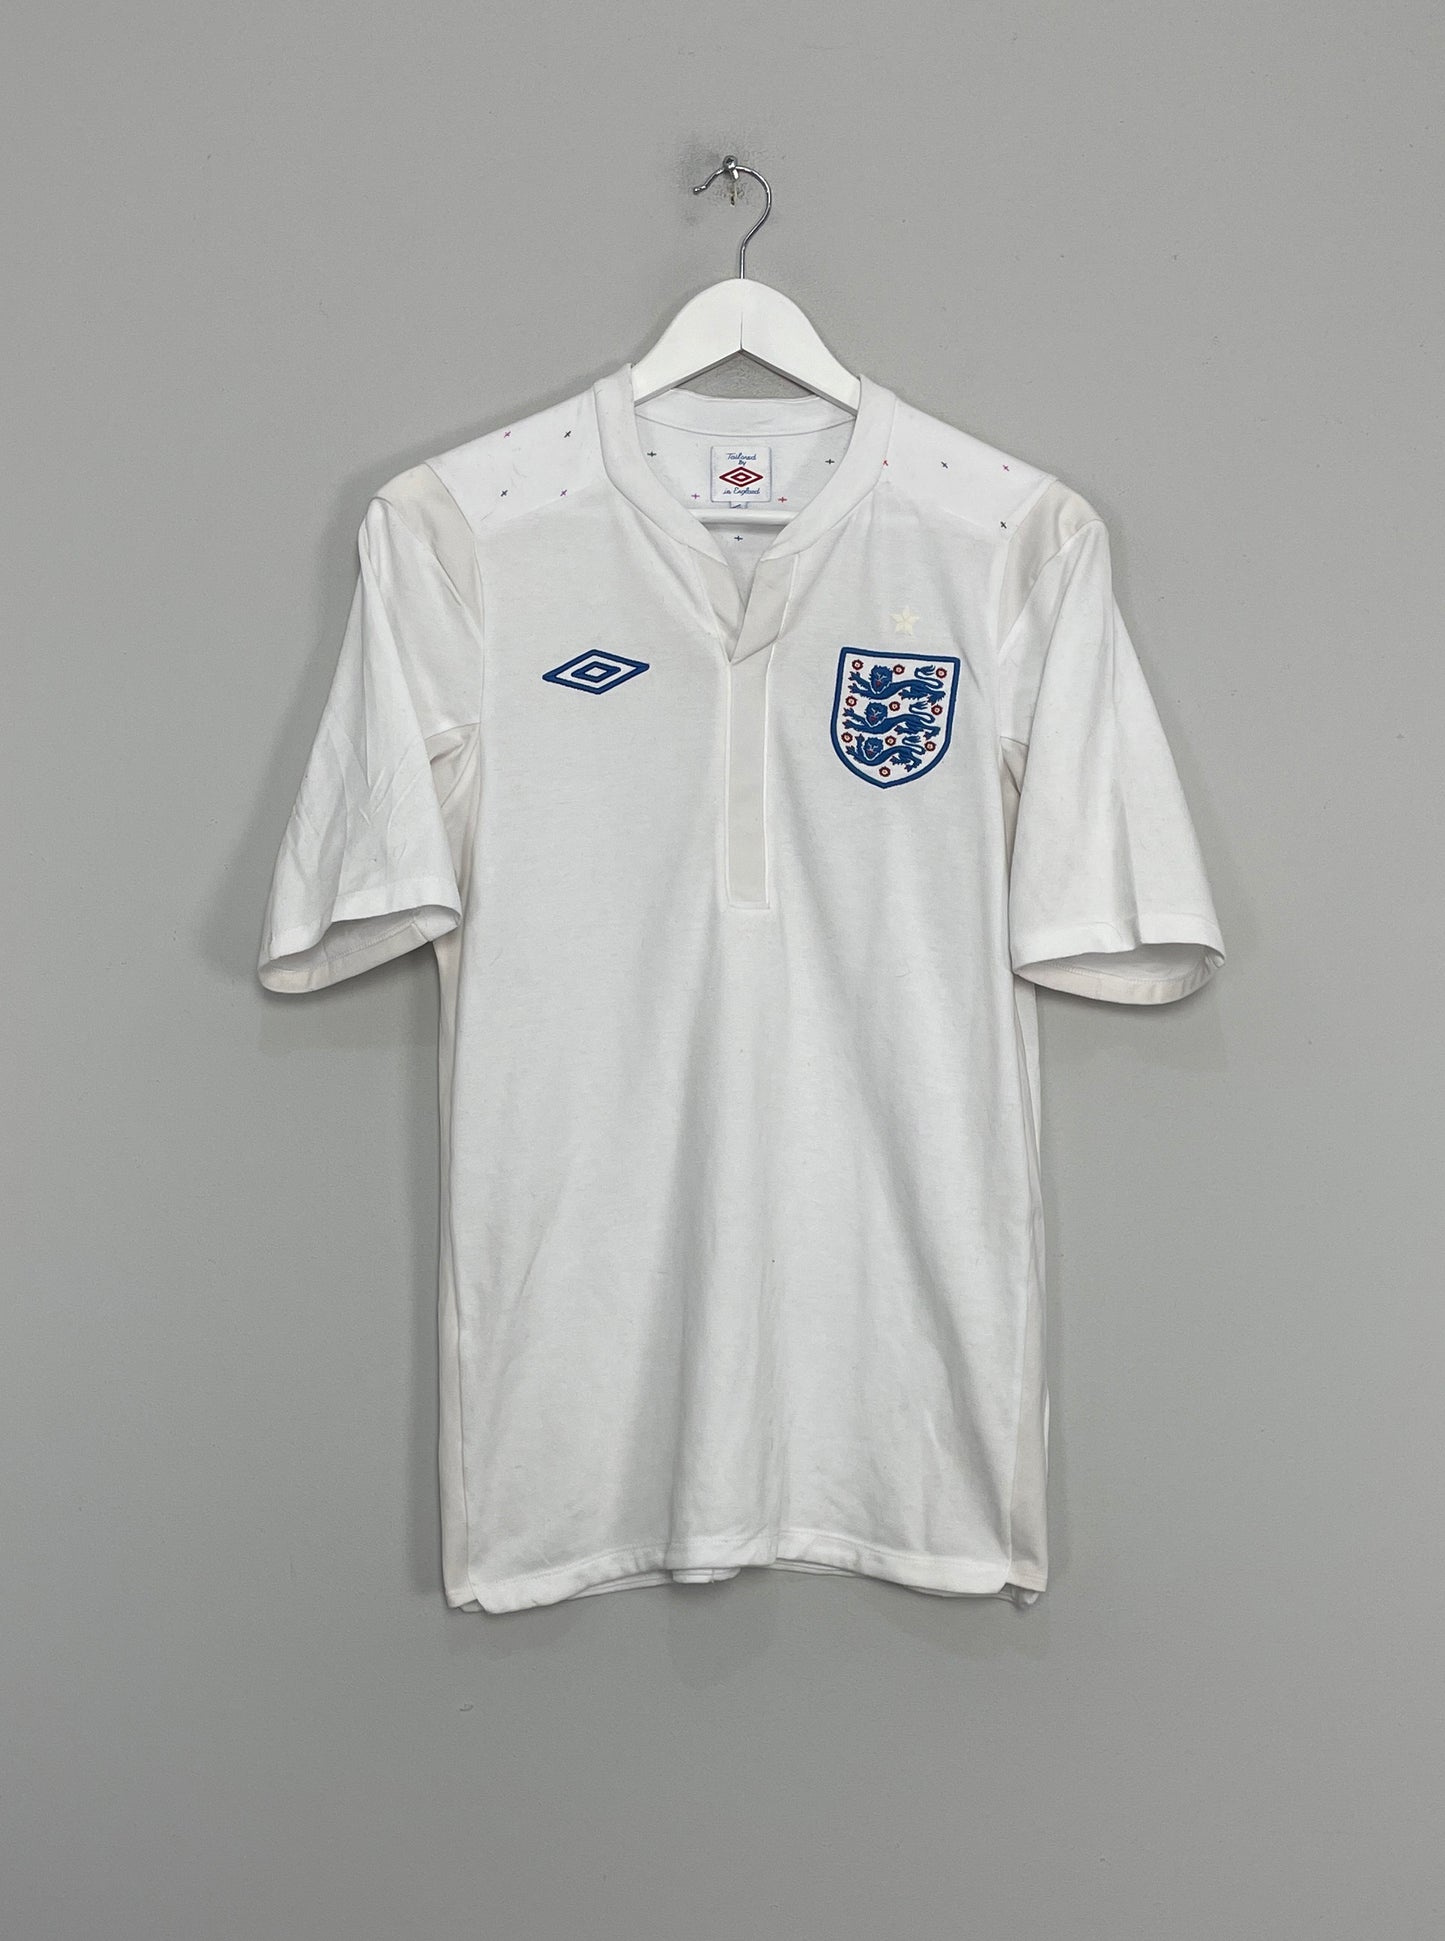 Image of the England shirt from the 2011/12 season